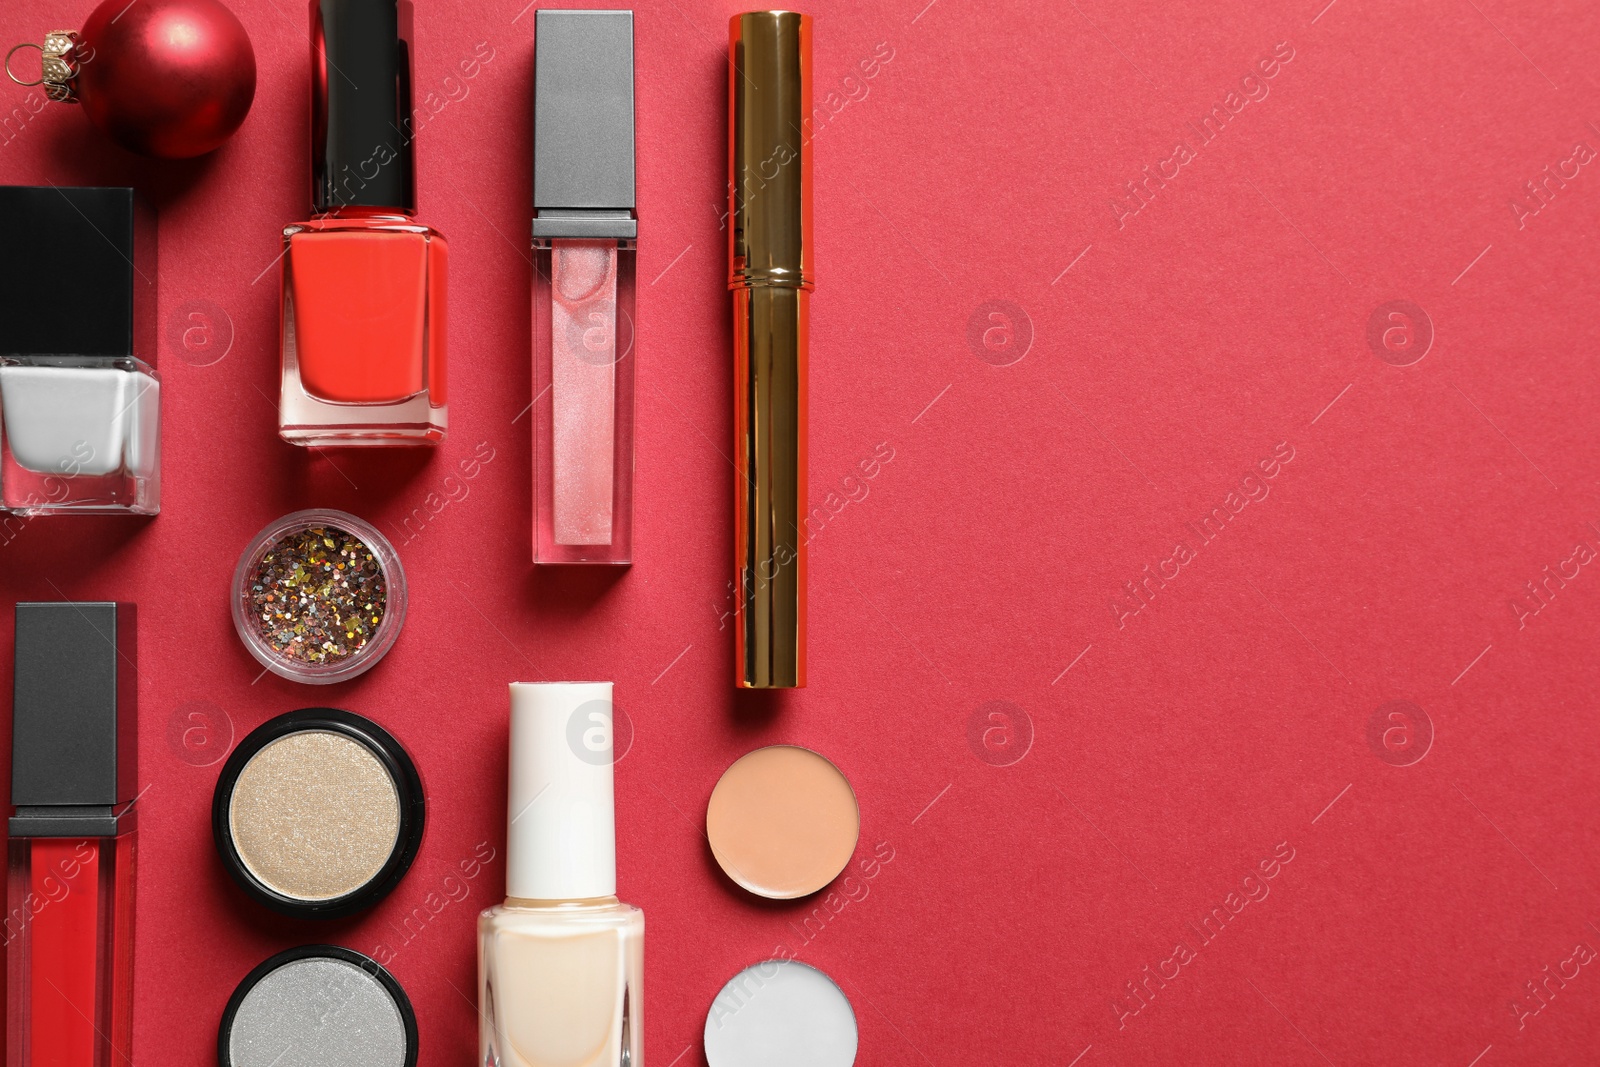 Photo of Flat lay composition with makeup products and Christmas decor on color background. Space for text